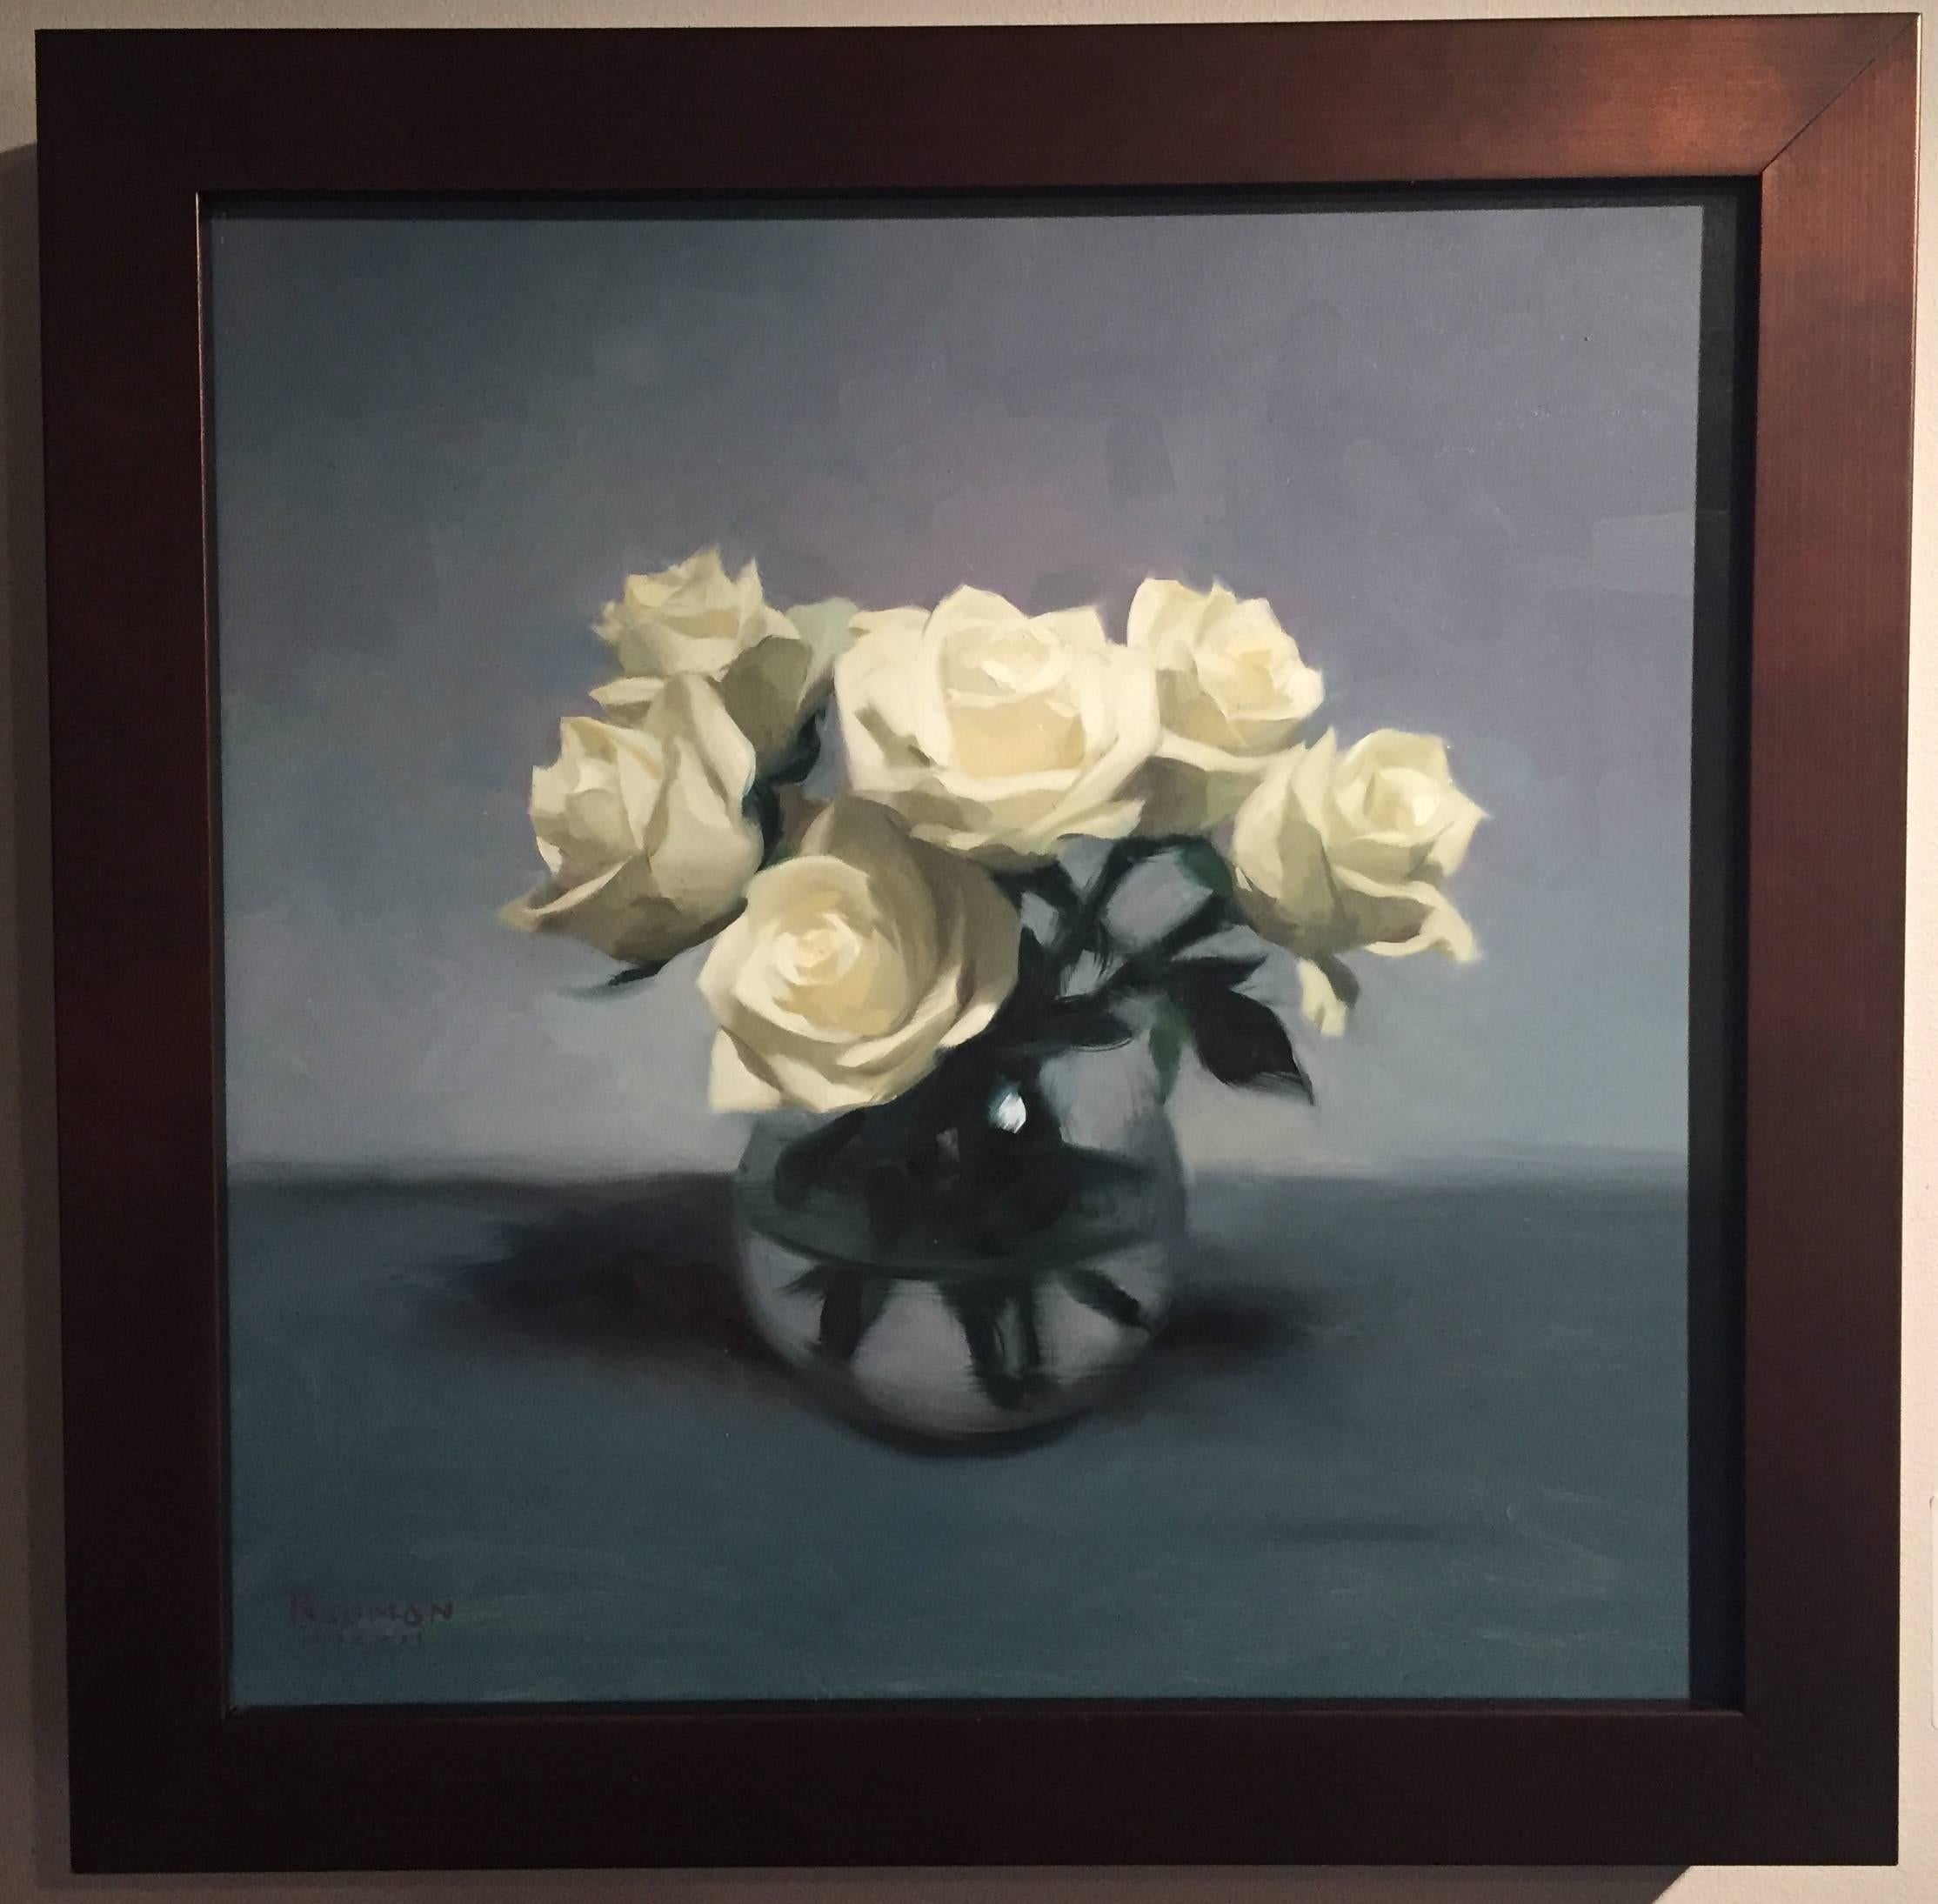 White Roses - Painting by Stephen Bauman